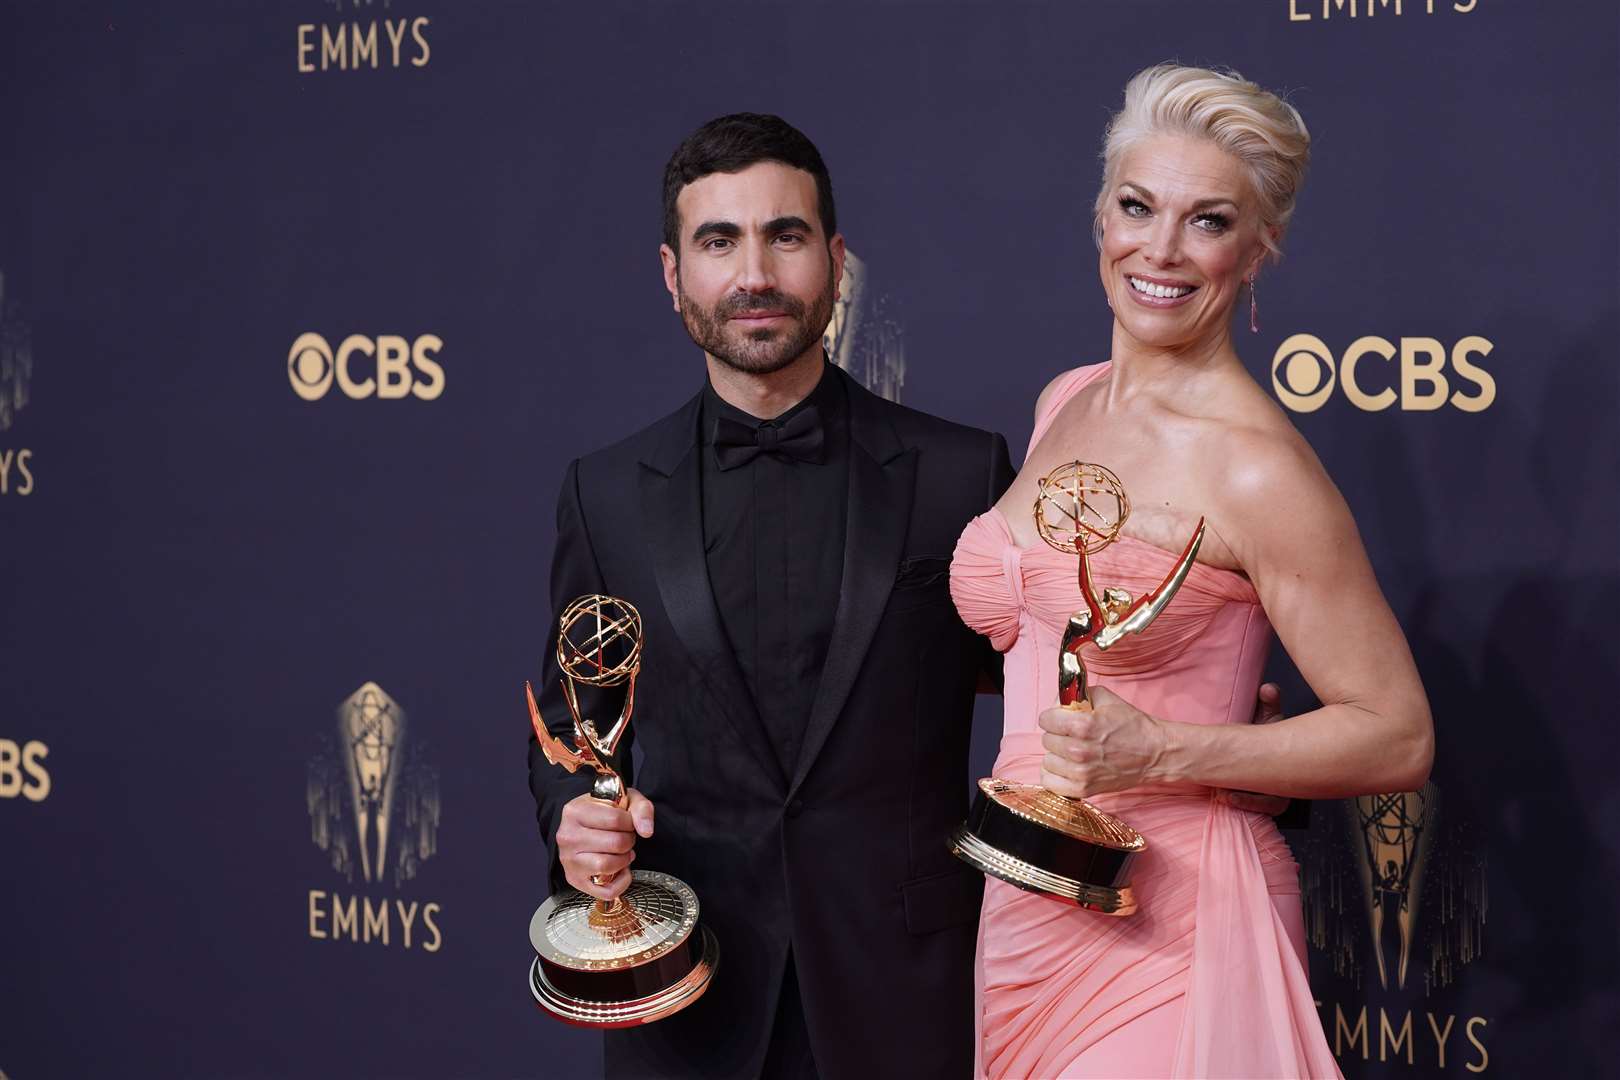 Brett Goldstein and Hannah Waddingham were among the winners at the Emmy Awards (AP Photo/Chris Pizzello)